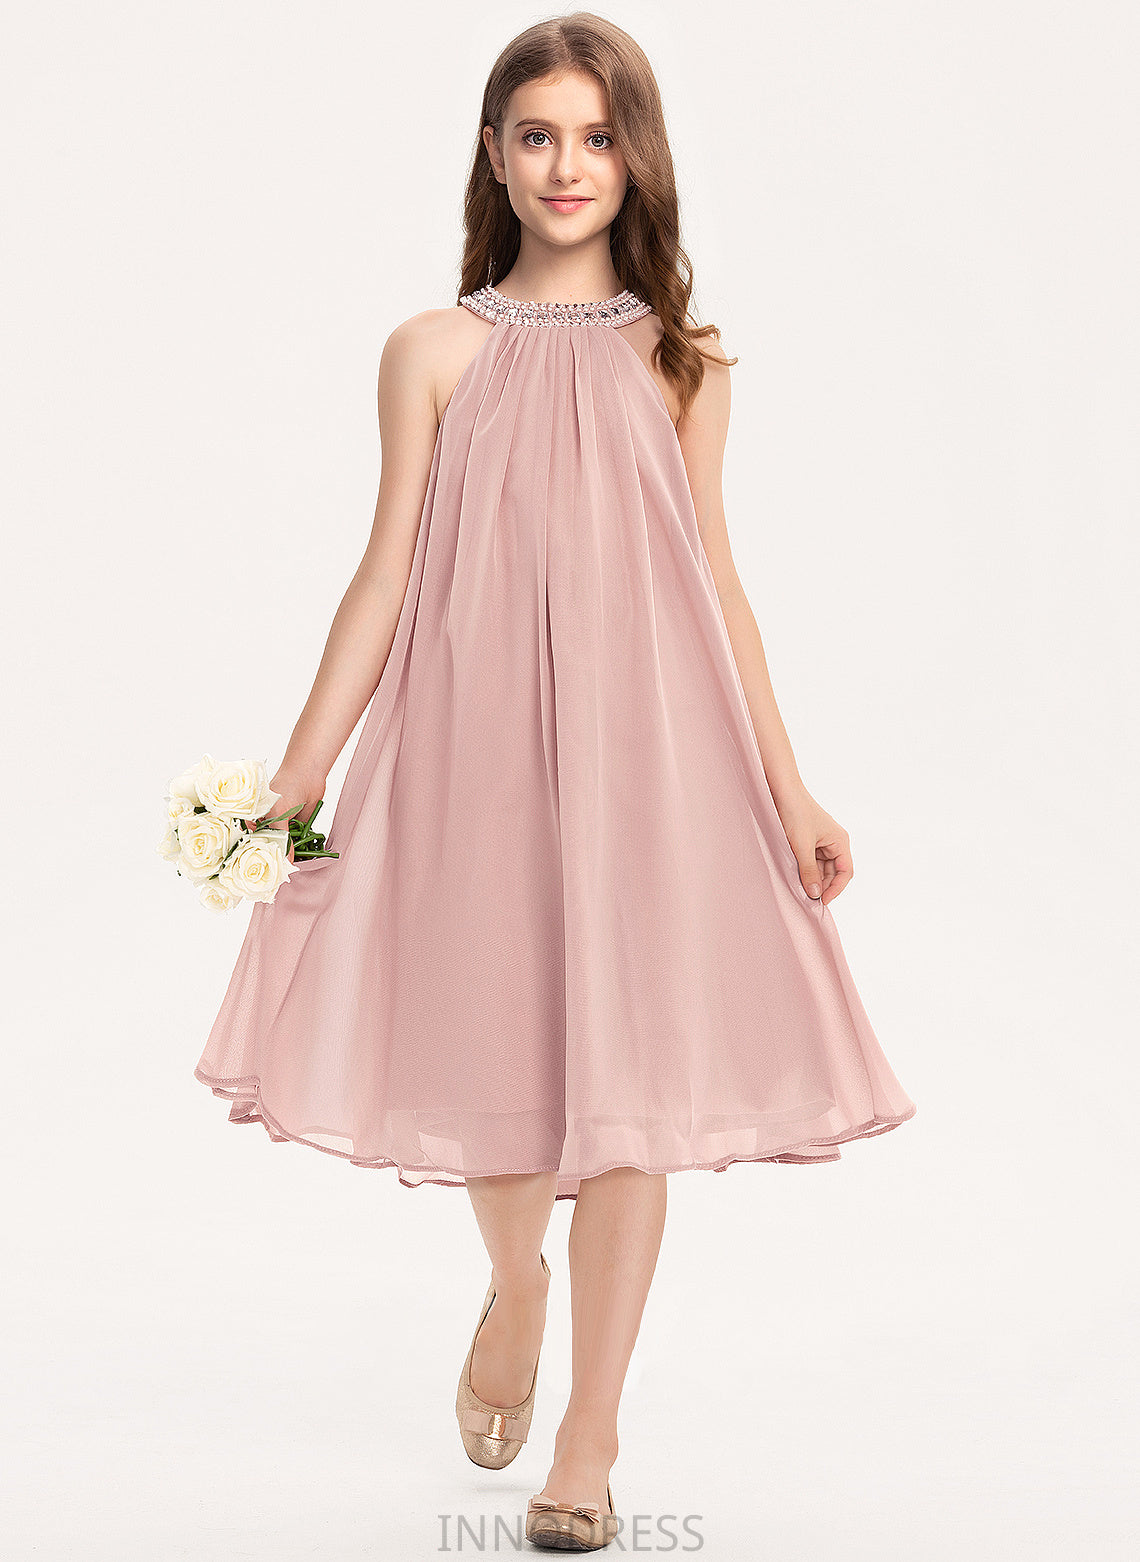 Chiffon Scoop Knee-Length Camryn With Neck Junior Bridesmaid Dresses A-Line Sequins Beading